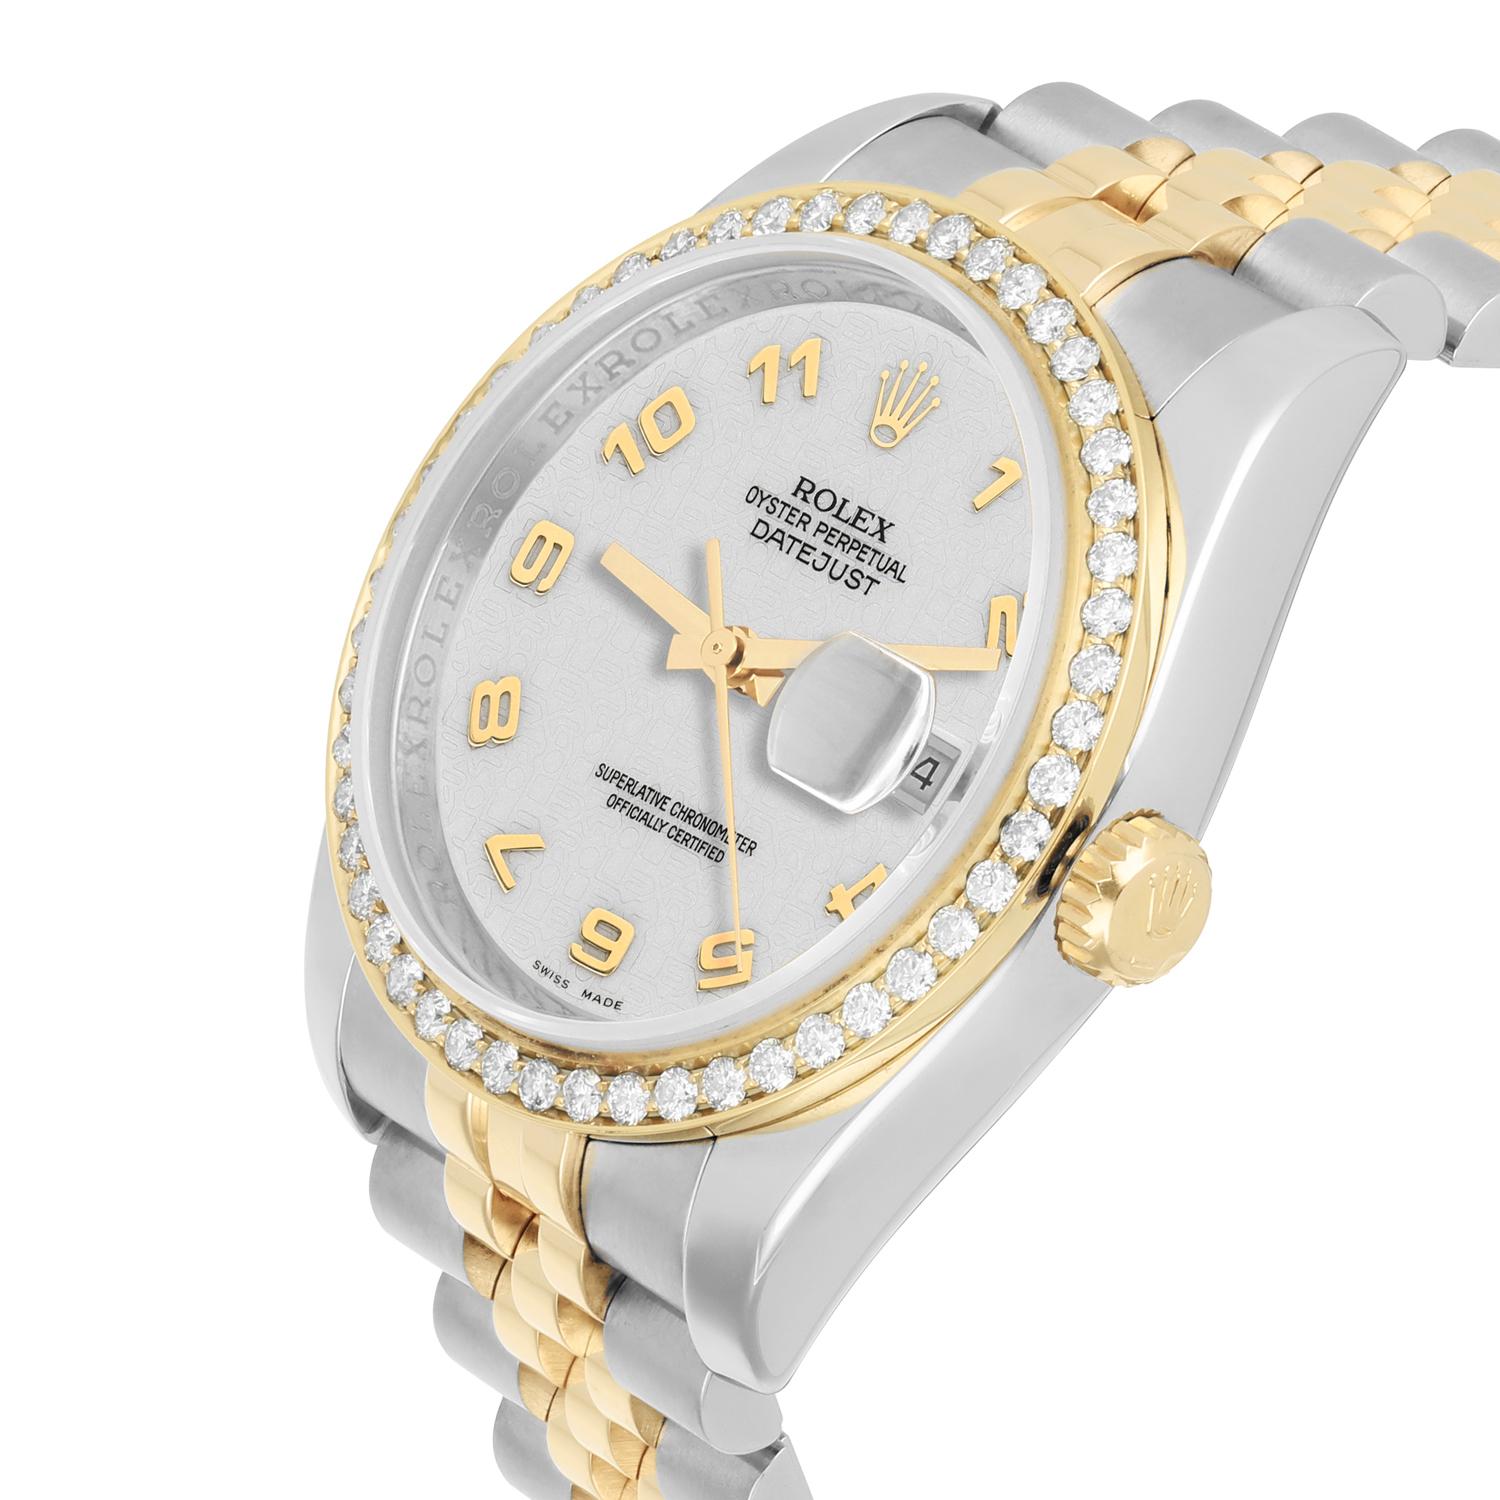 Rolex Datejust 36 Gold/Steel 116233 Diamond Bezel Off White Dial Jubilee Band In Excellent Condition For Sale In New York, NY